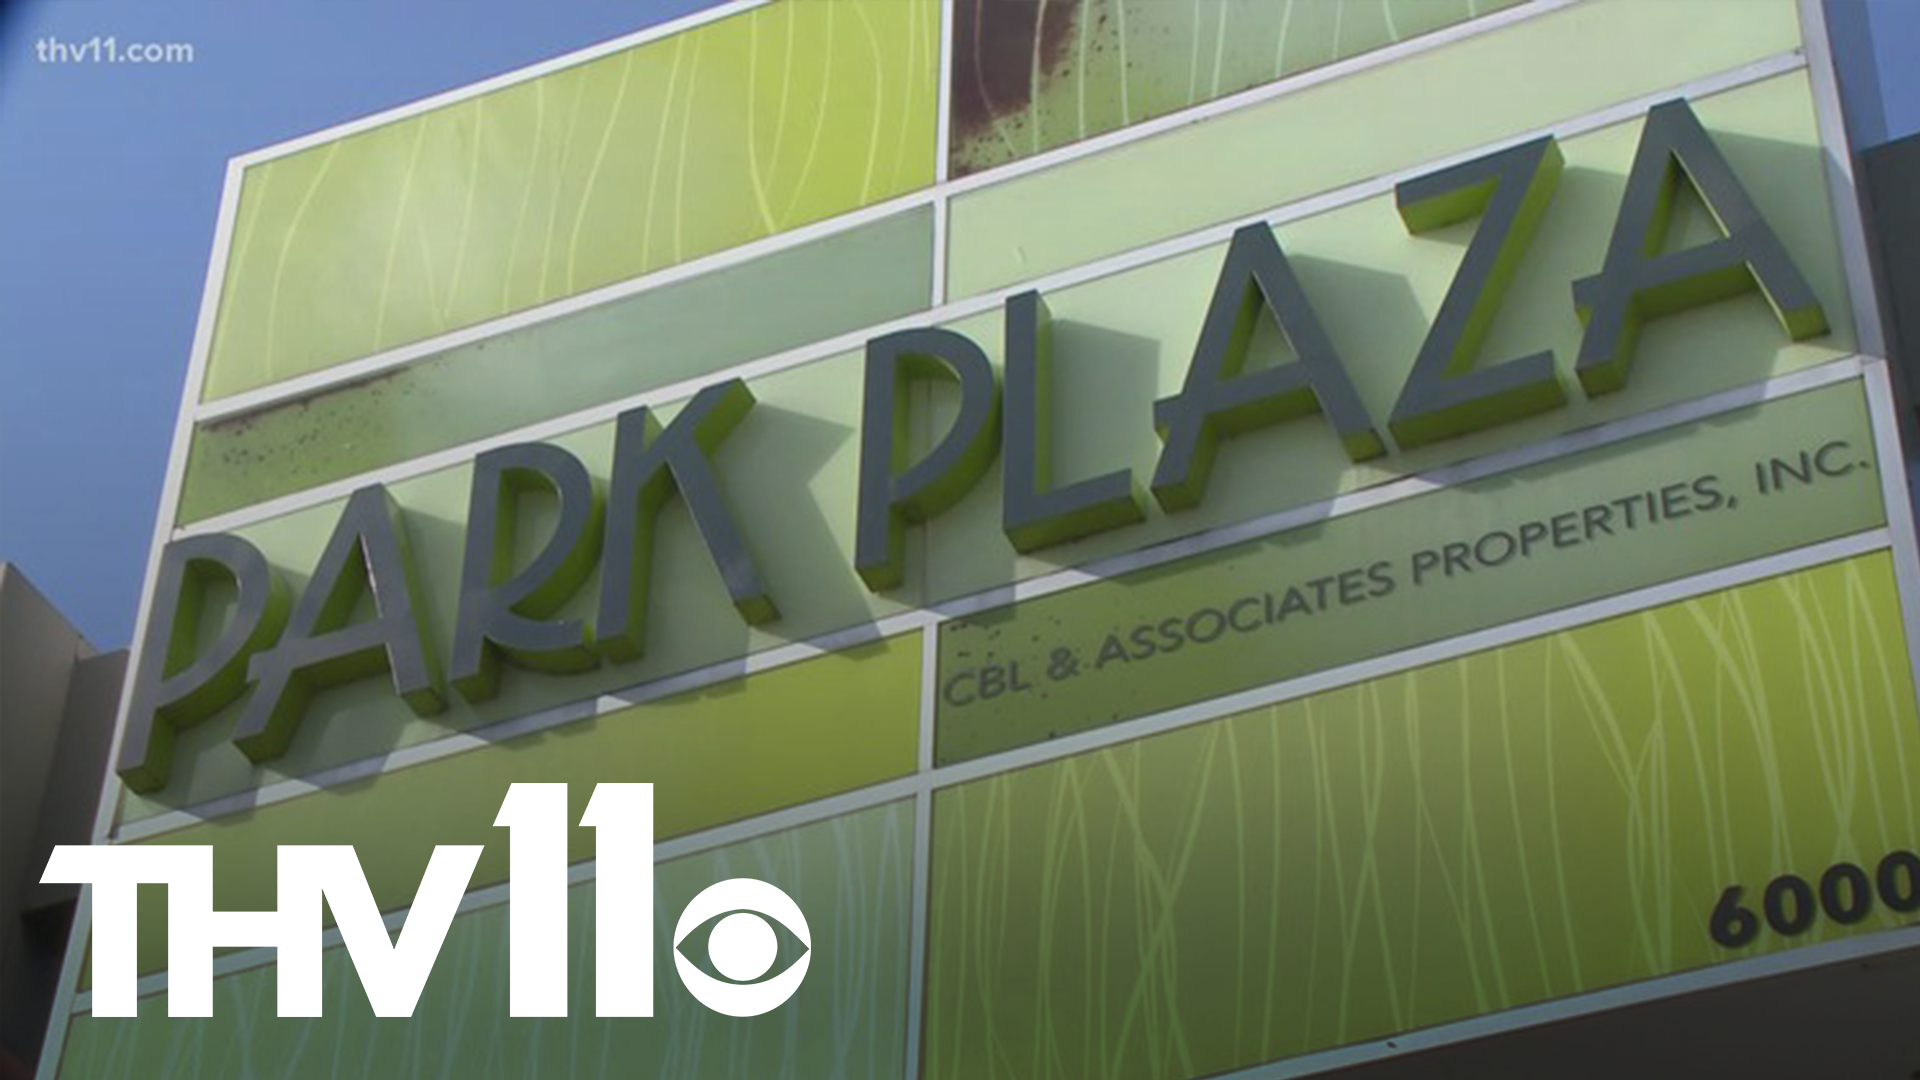 The battle over abortion is heating up right now in America. The Park Plaza Mall in Little Rock will be sold later this month.